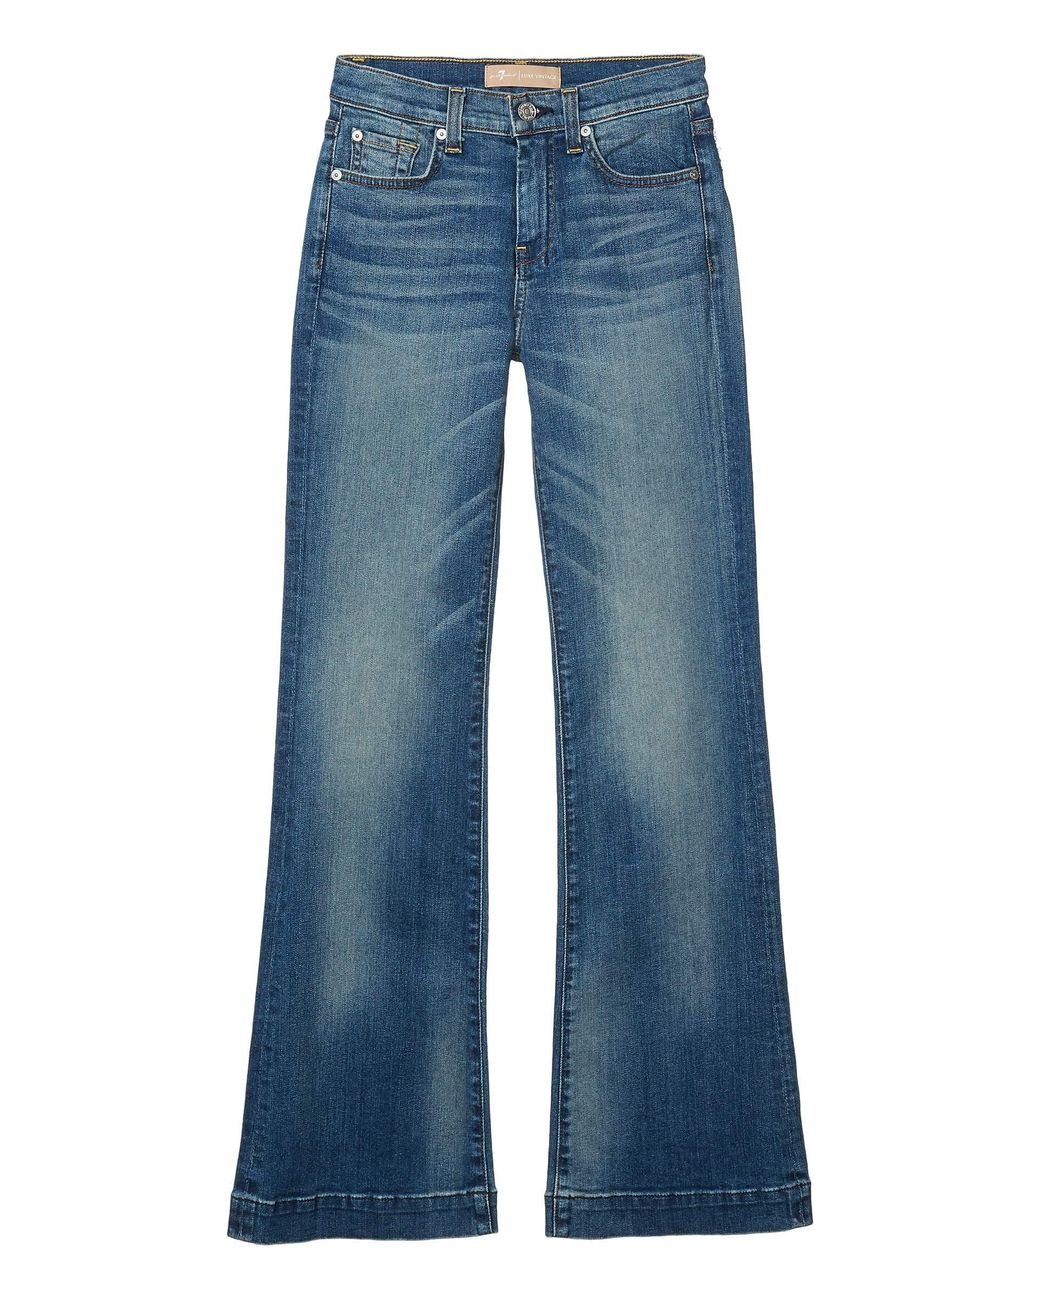 7 For All Mankind Denim Tailorless Dojo In Distressed Authentic Light ...